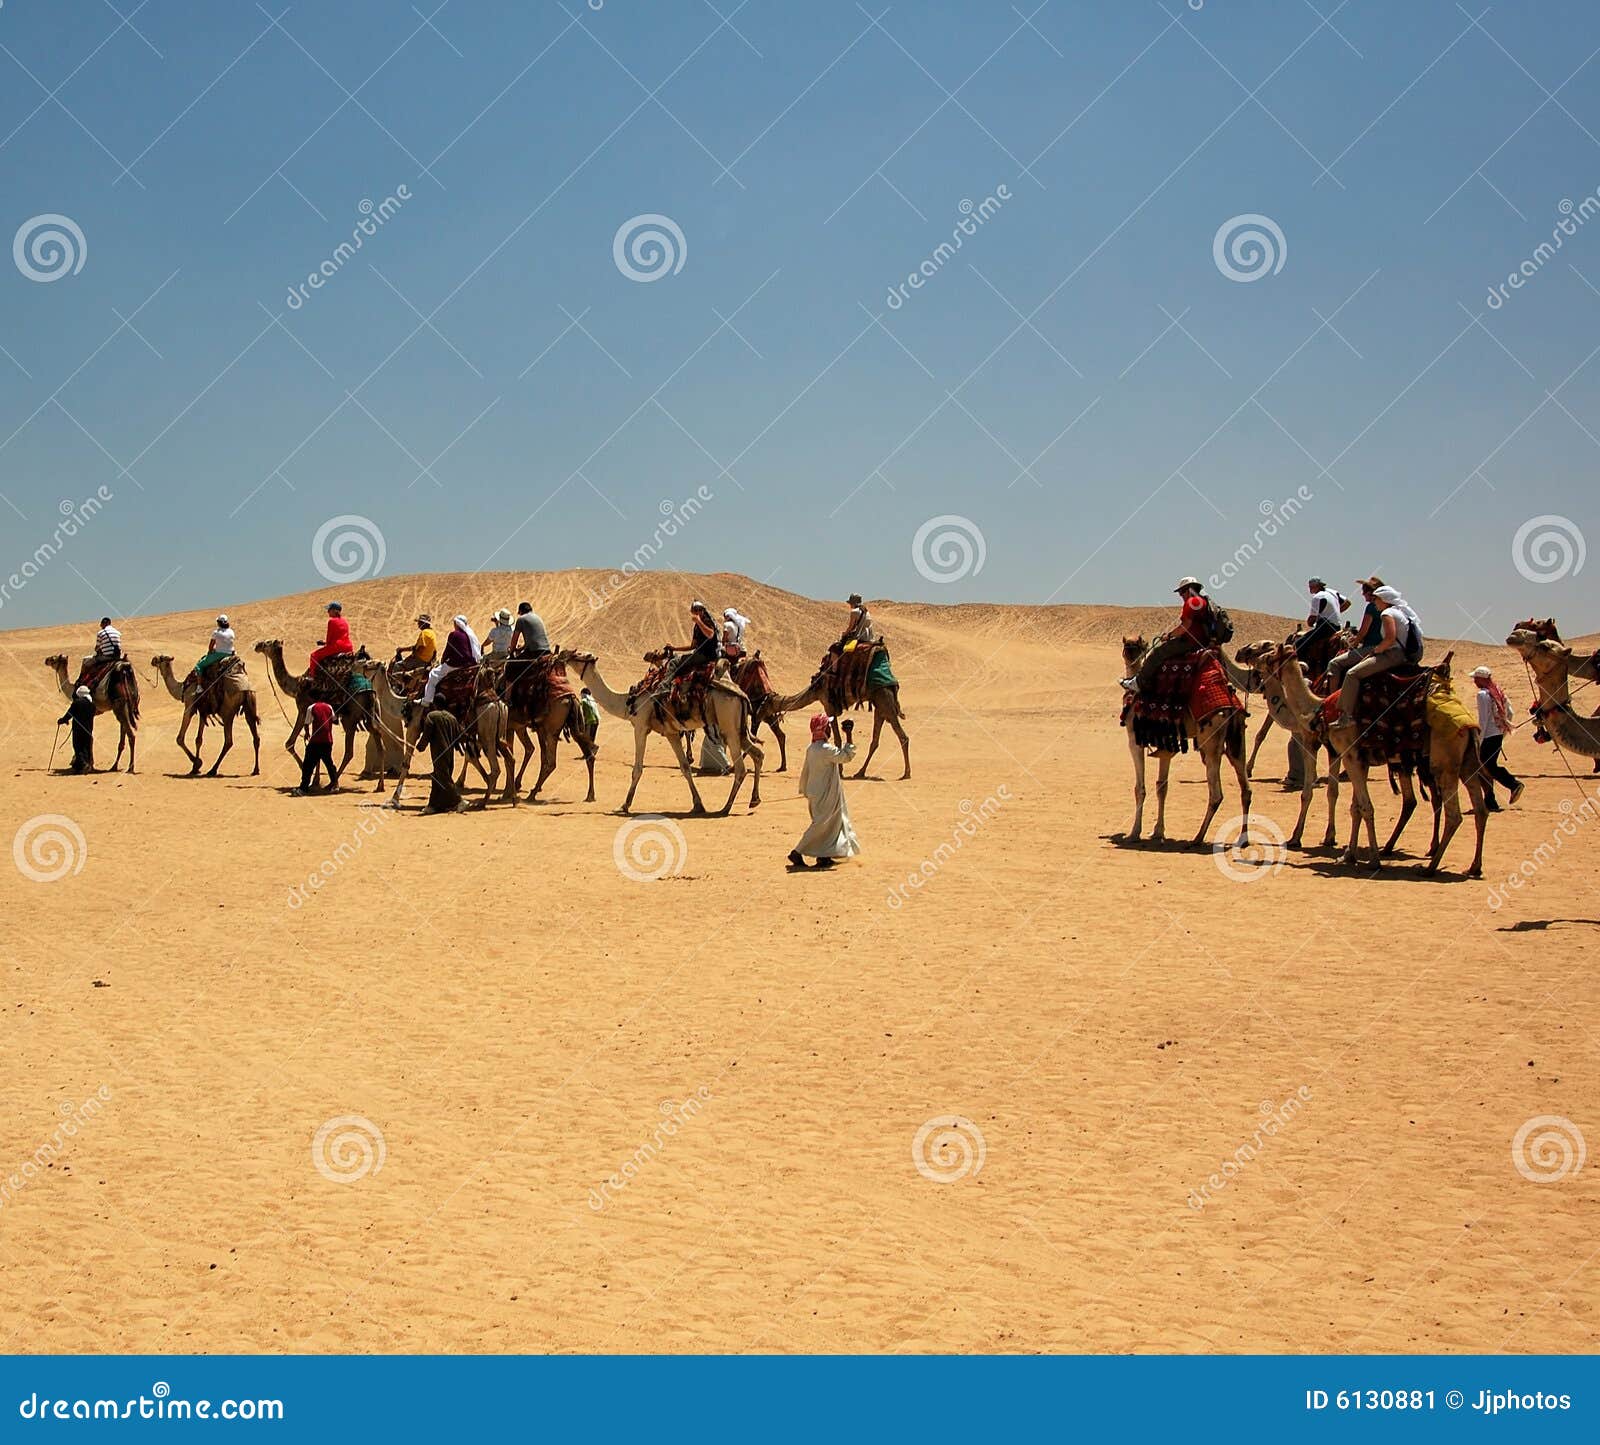 Albums 96+ Images what animal was used to transport goods across the sahara desert? Sharp